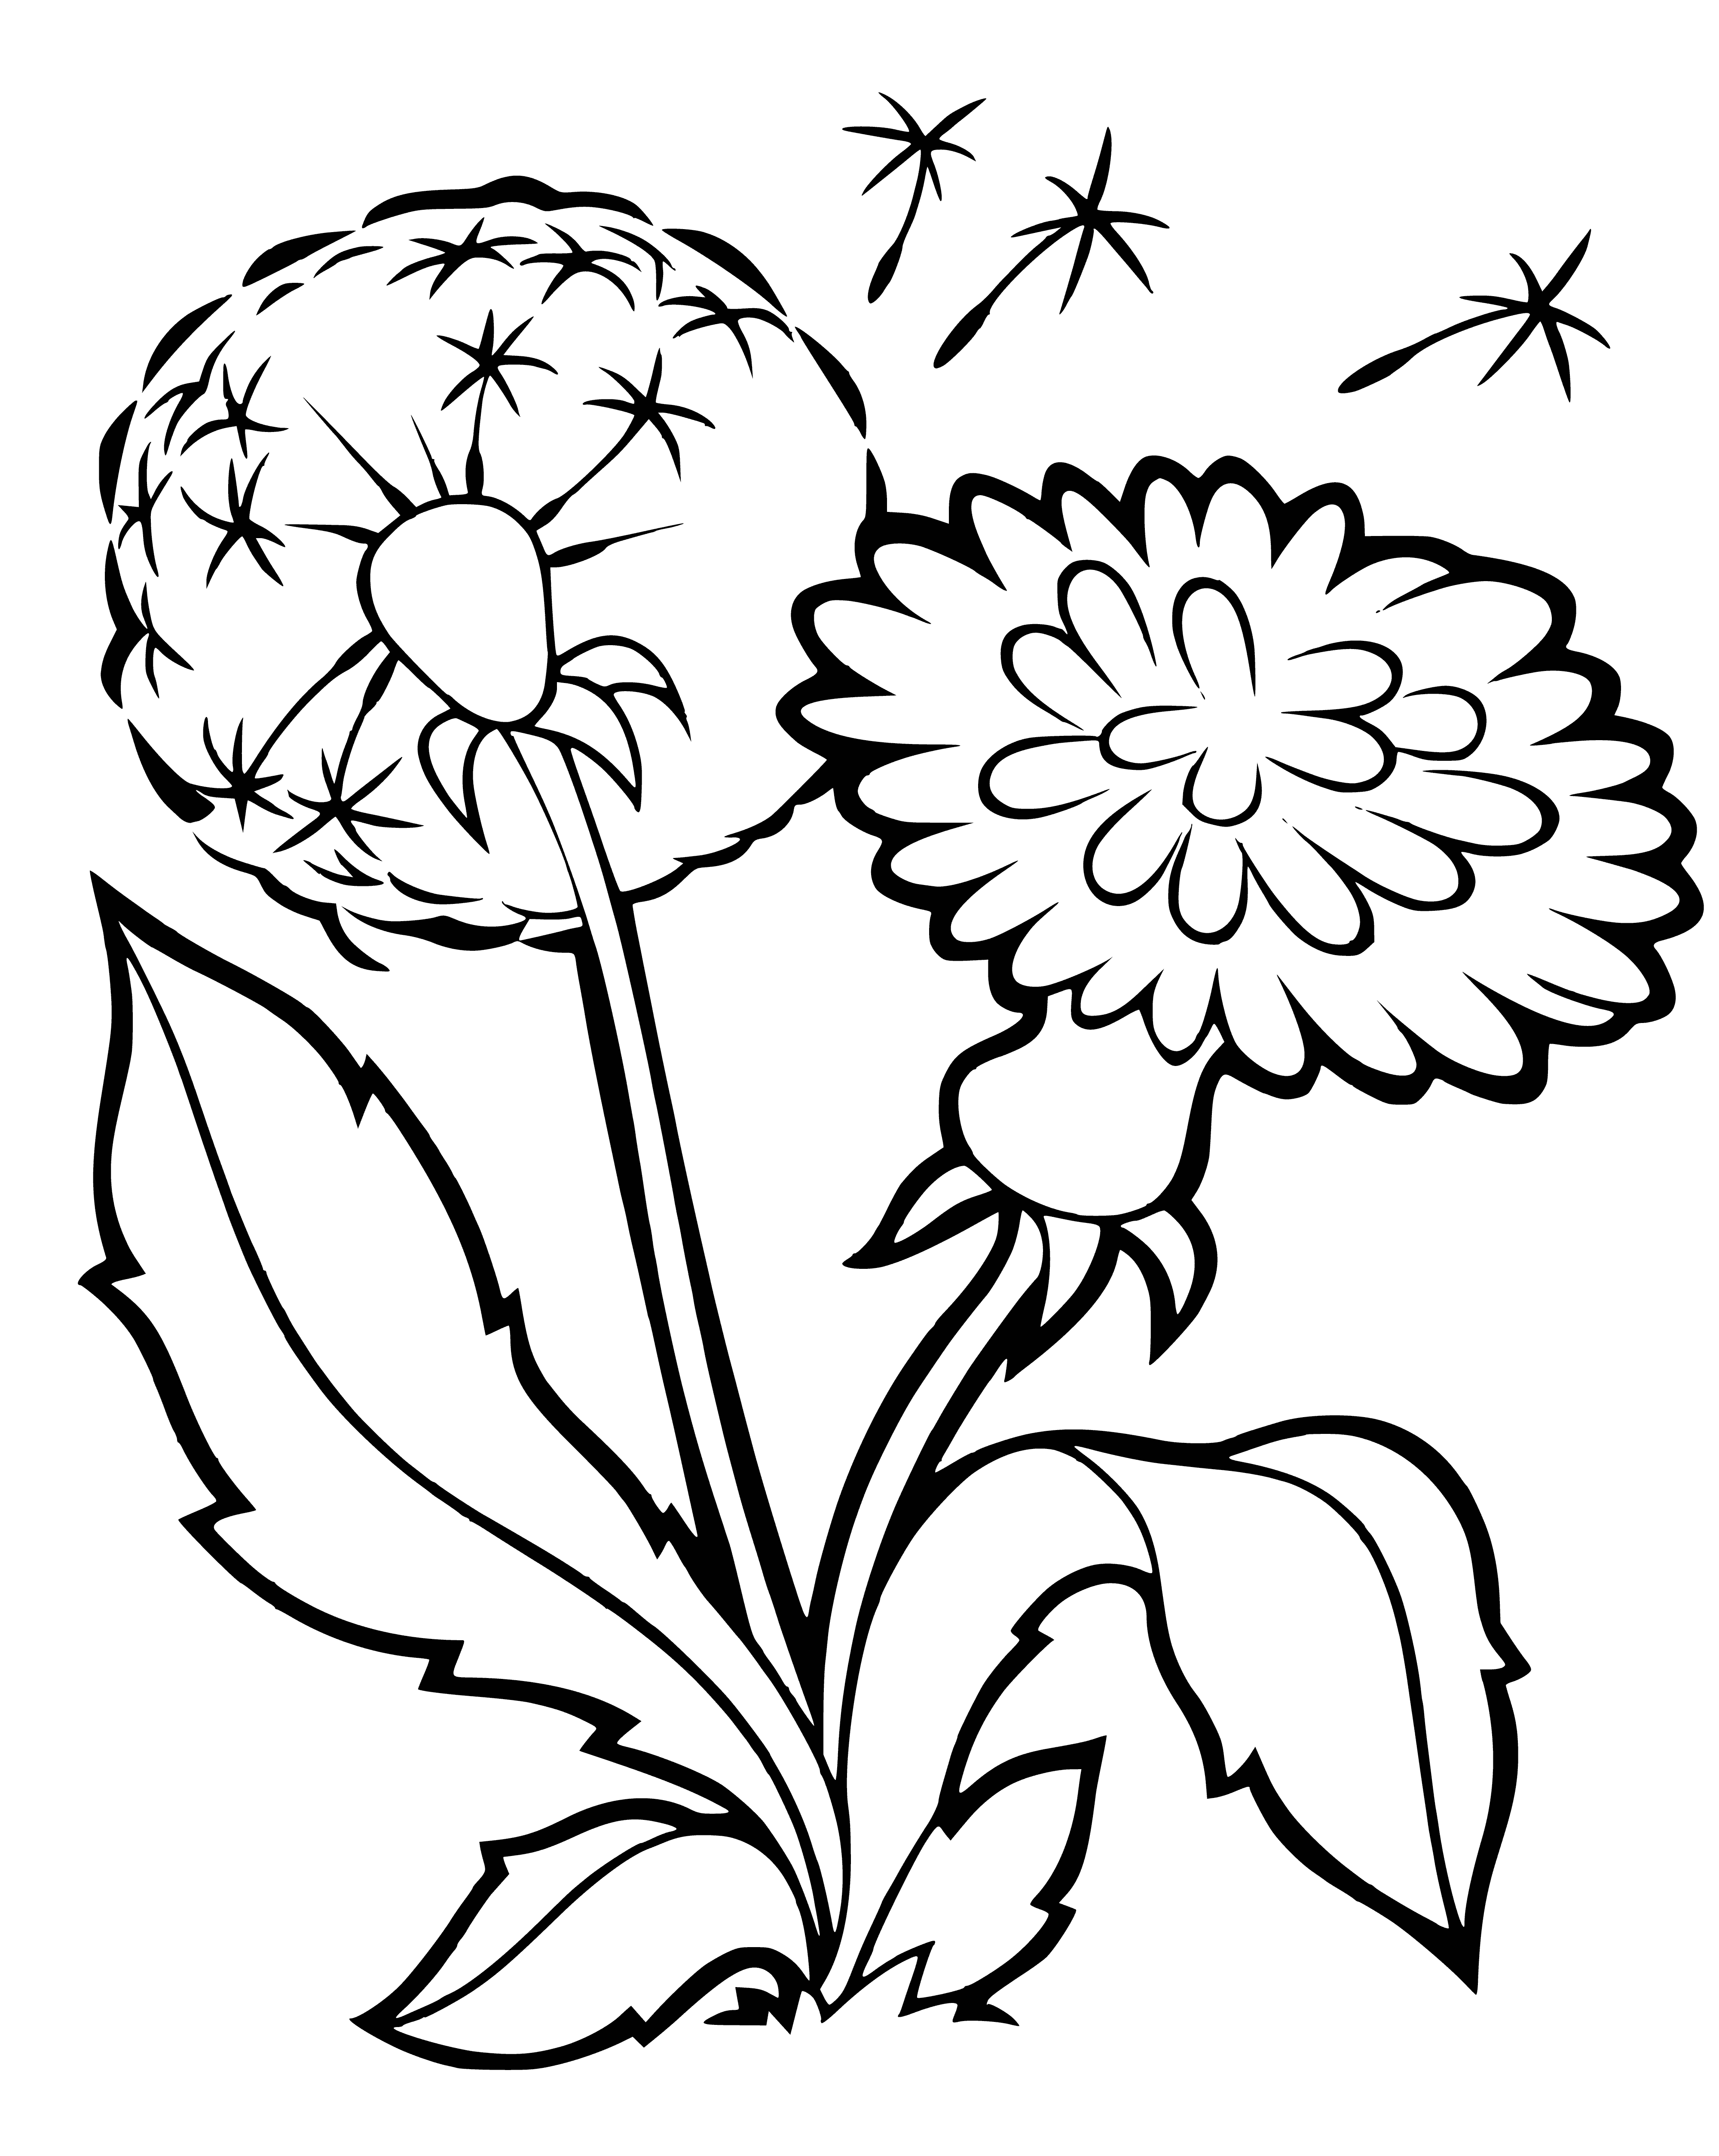 coloring page: Child can color a dandelion with yellow flowers for a weed found in many places.